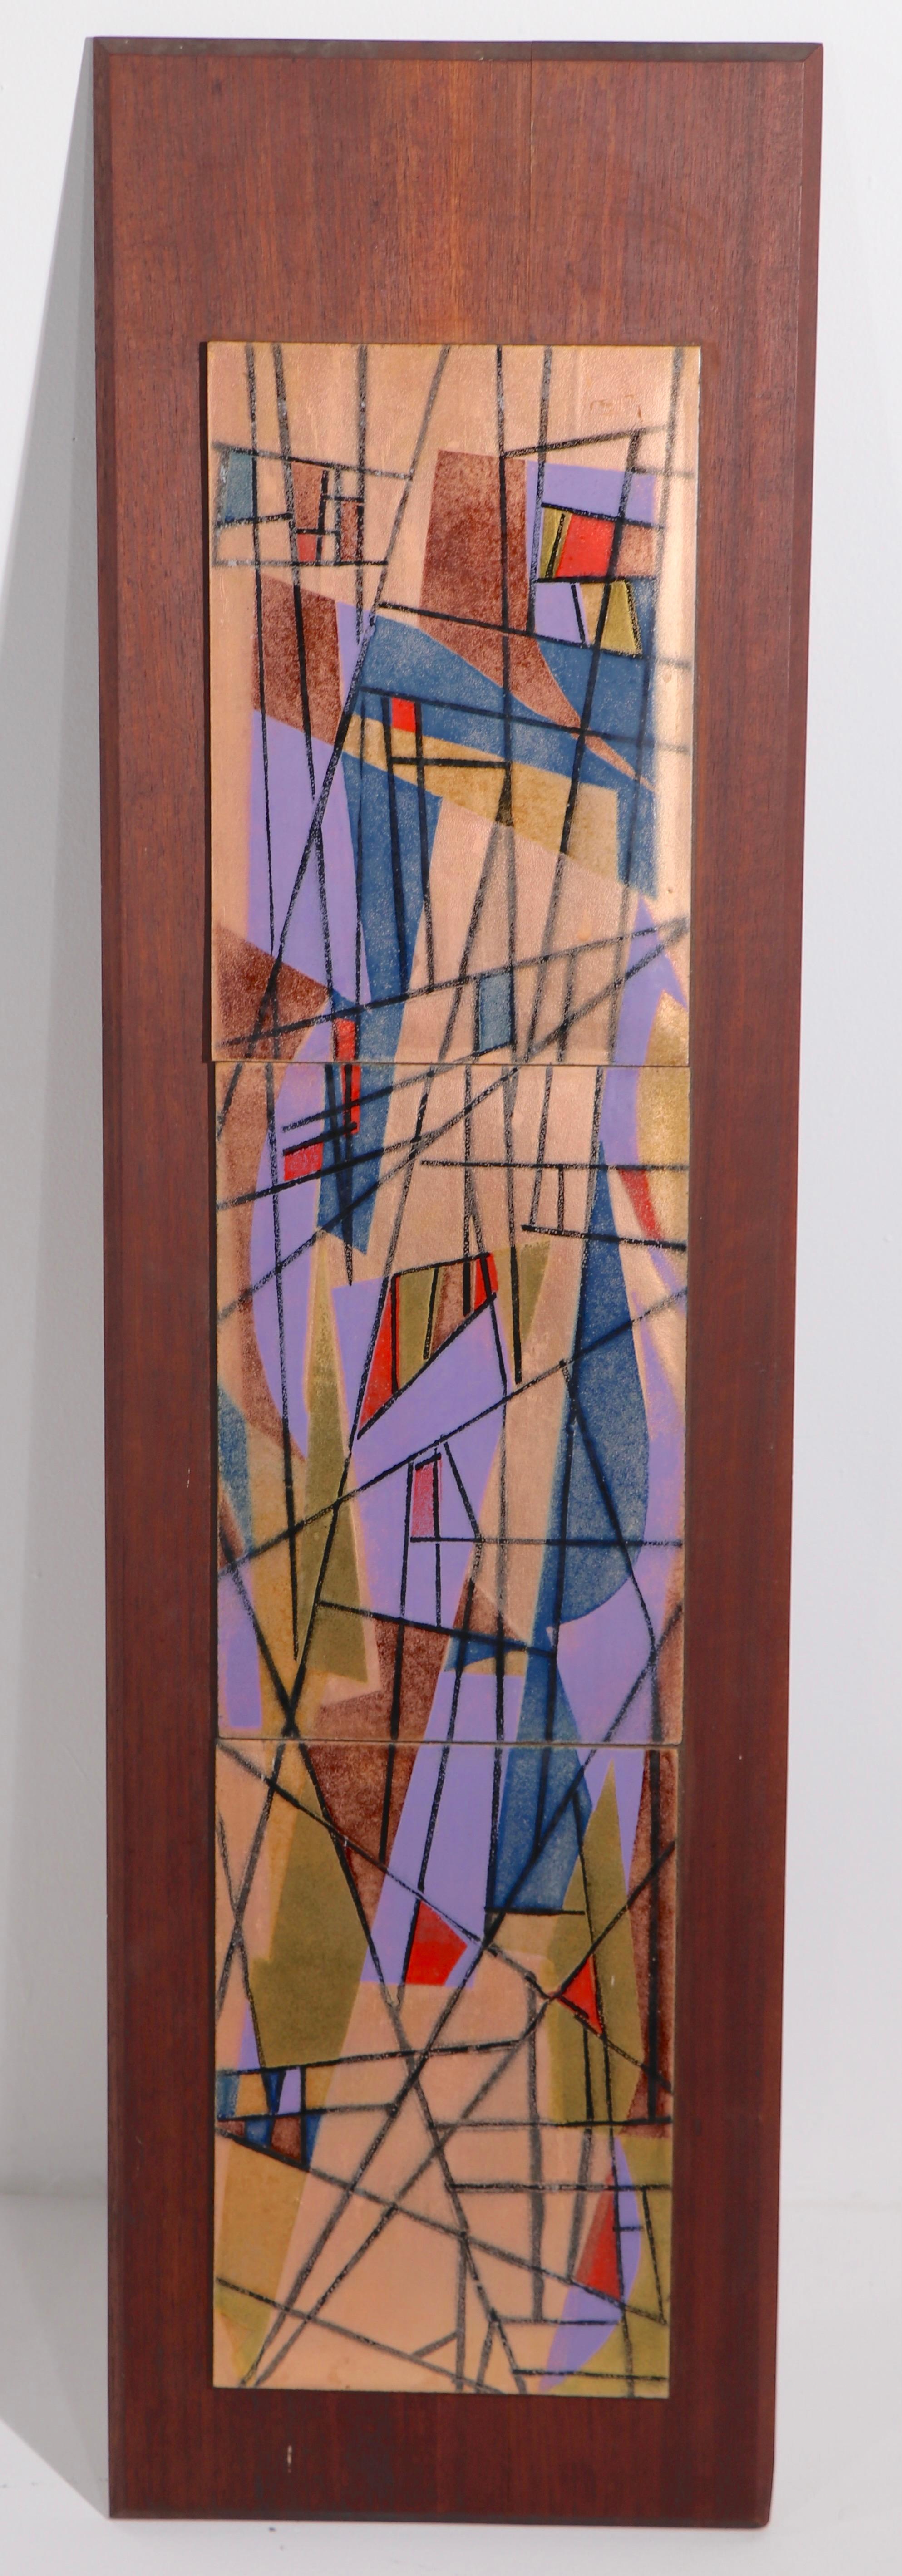 Classic modernist enamel wall hanging plaque by noted artist Judith Daner. The piece features an abstract geometric pattern executed in enamel on copper panels, which are attached to a solid wood board, that can be hung either vertically or